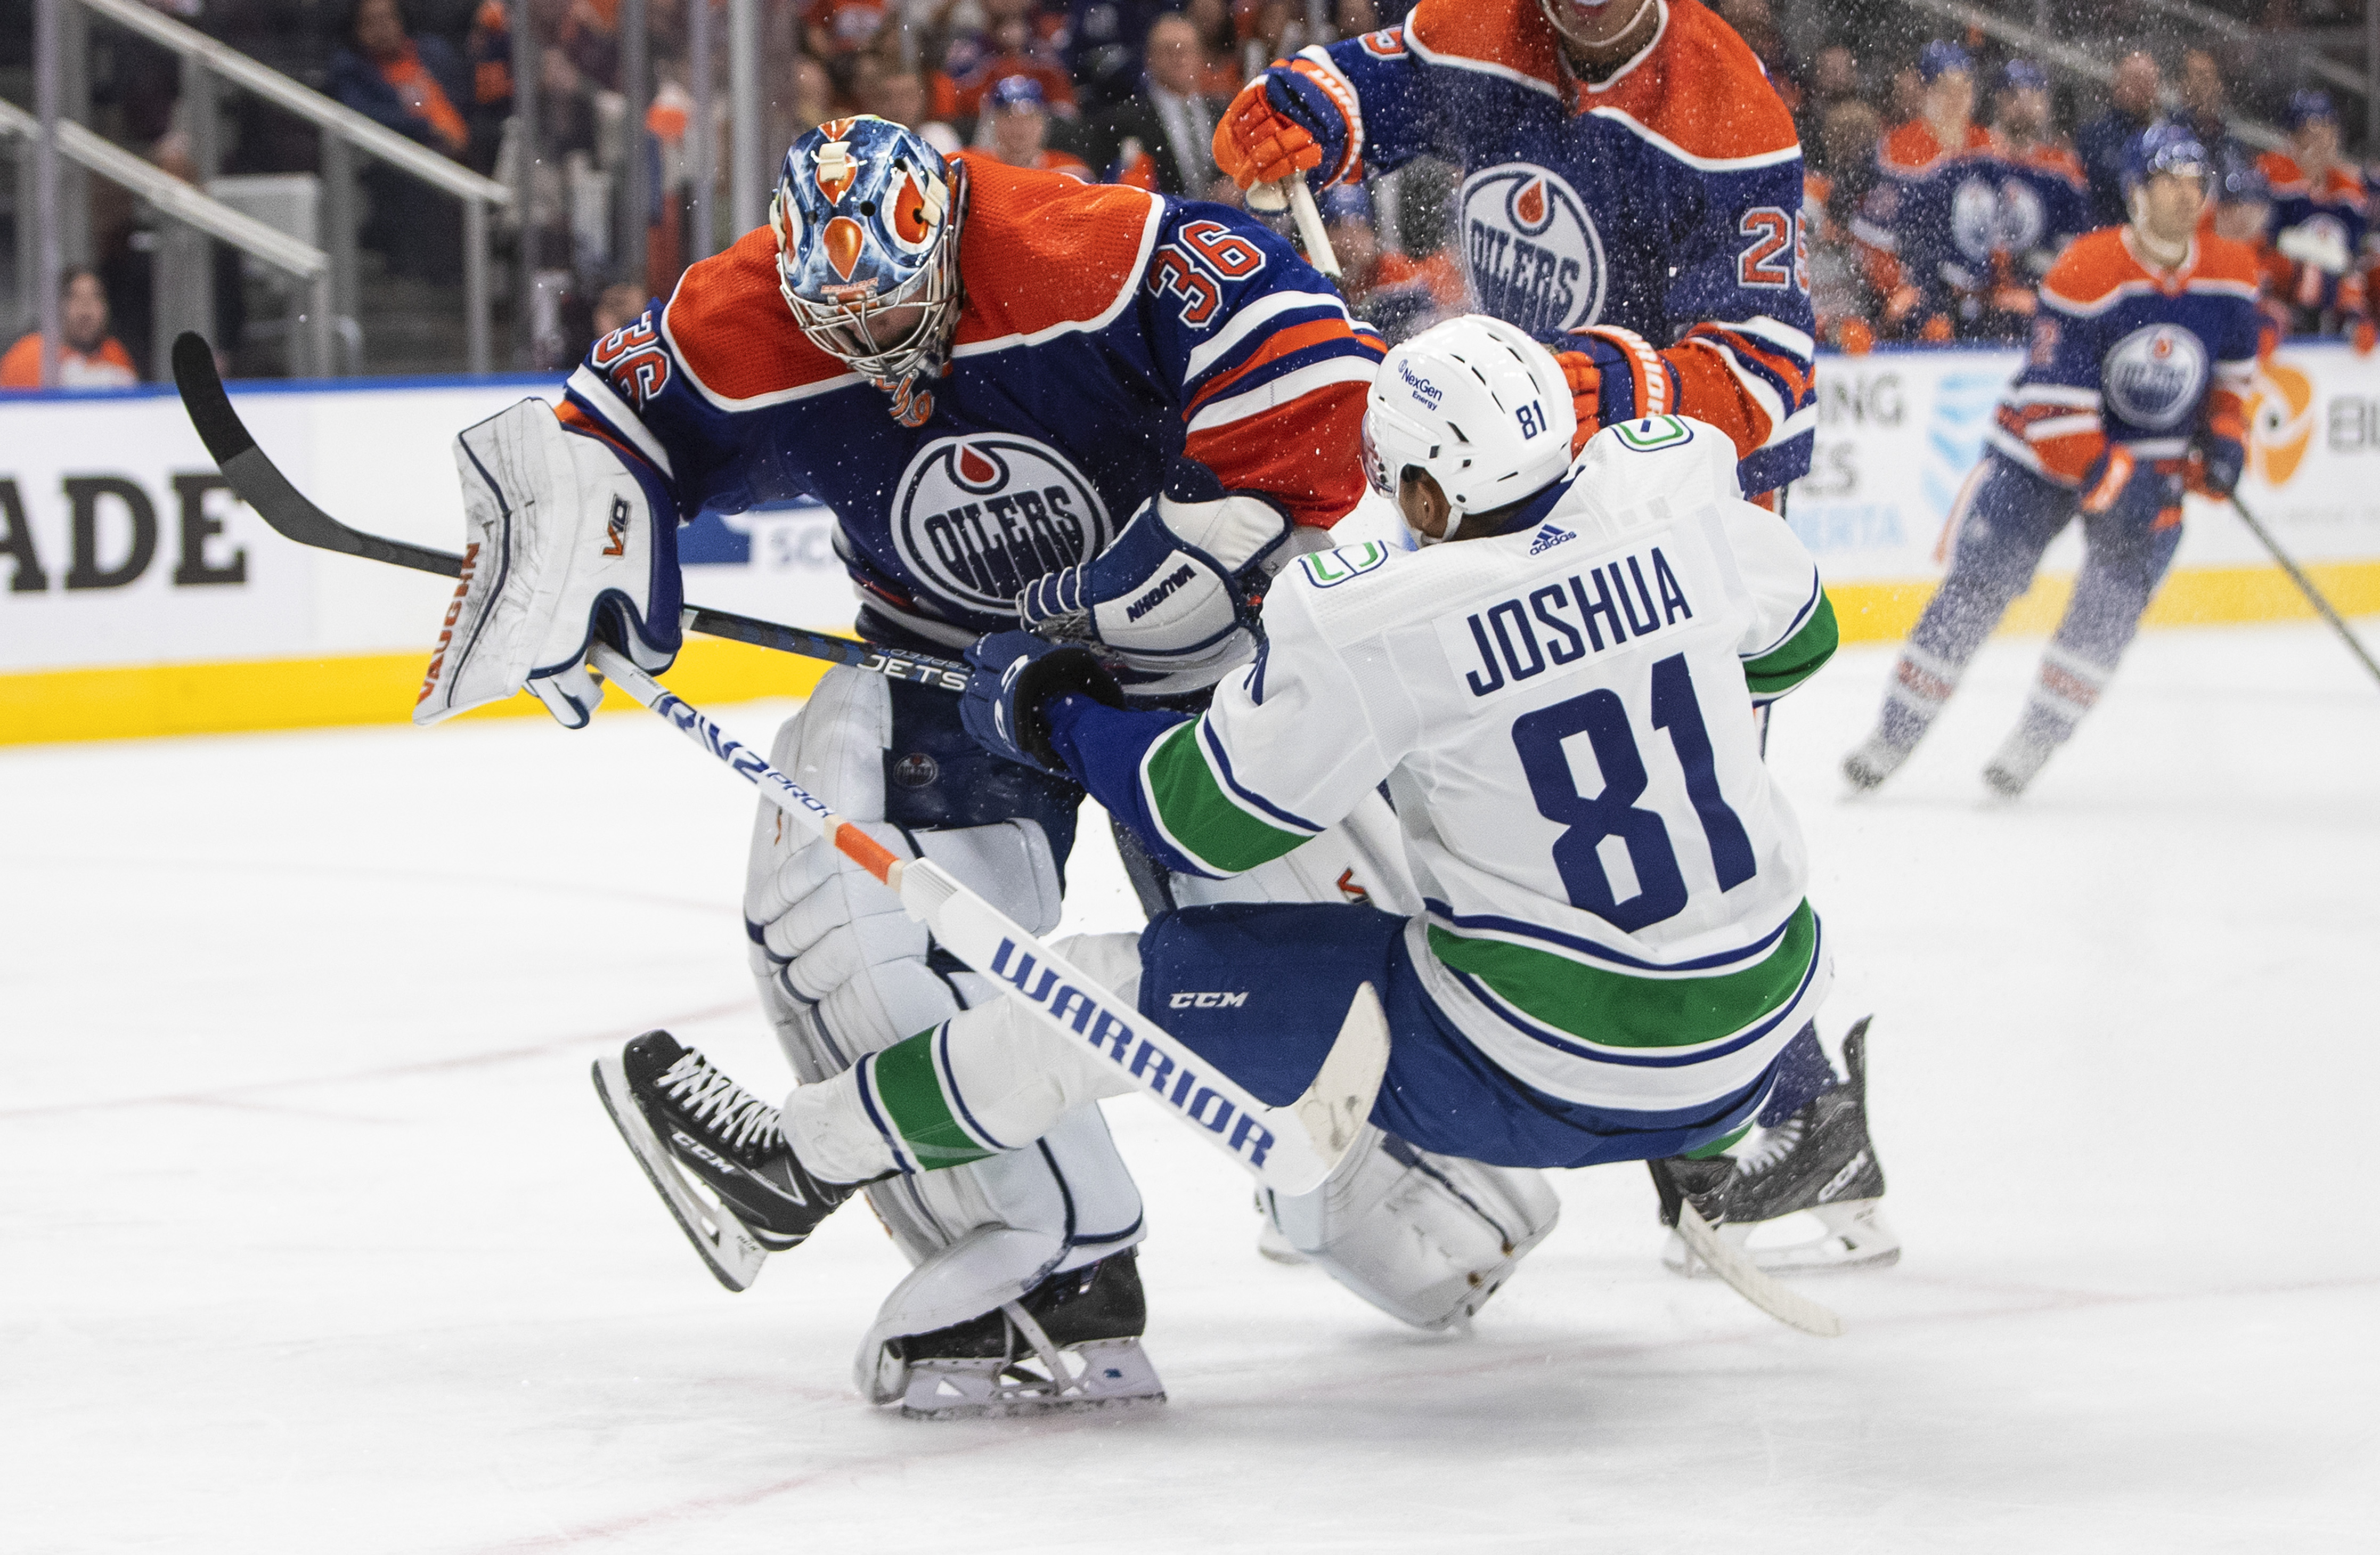 Oilers lose to Canucks in NHL opener